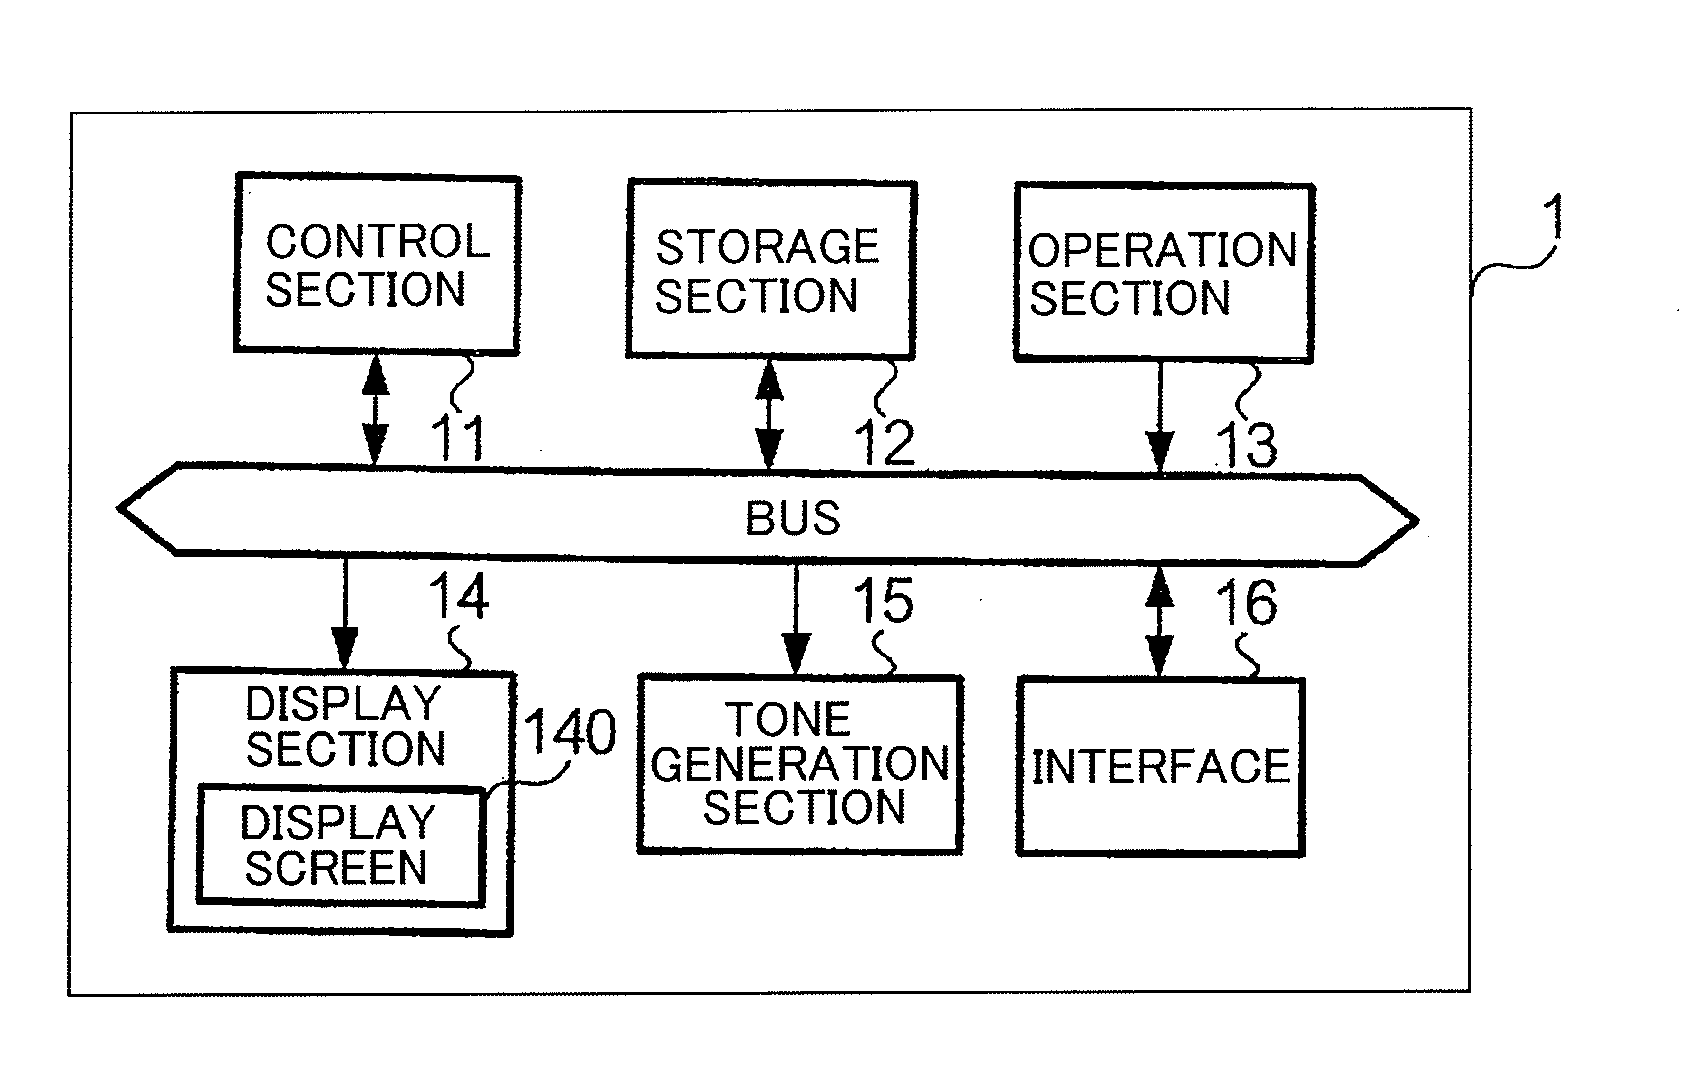 Tone data search apparatus and method